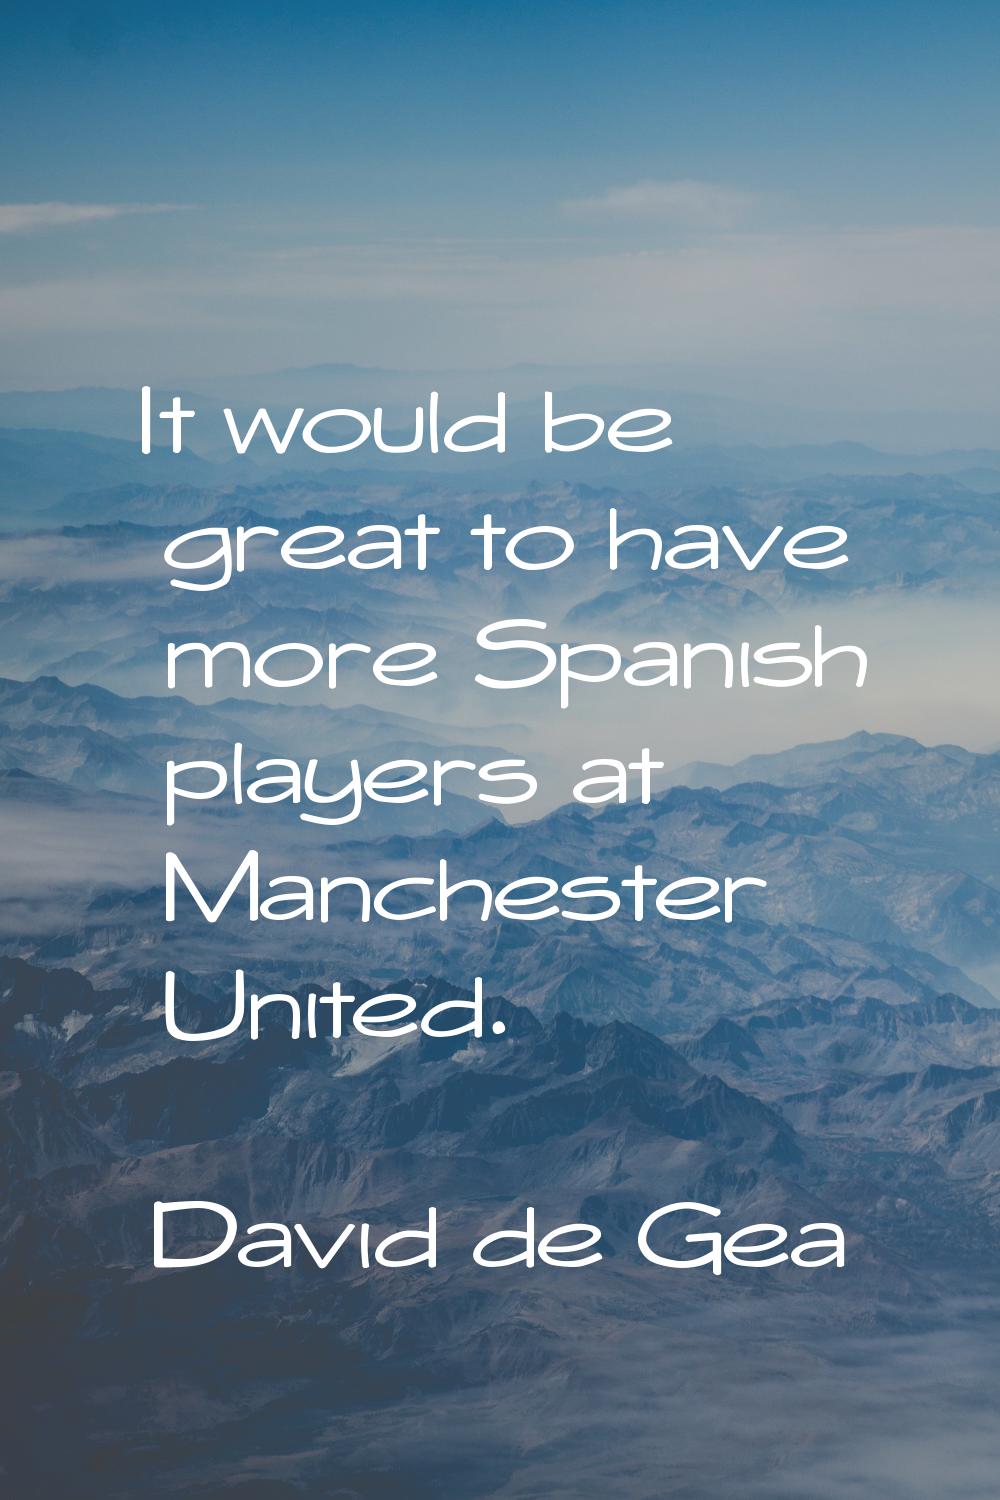 It would be great to have more Spanish players at Manchester United.